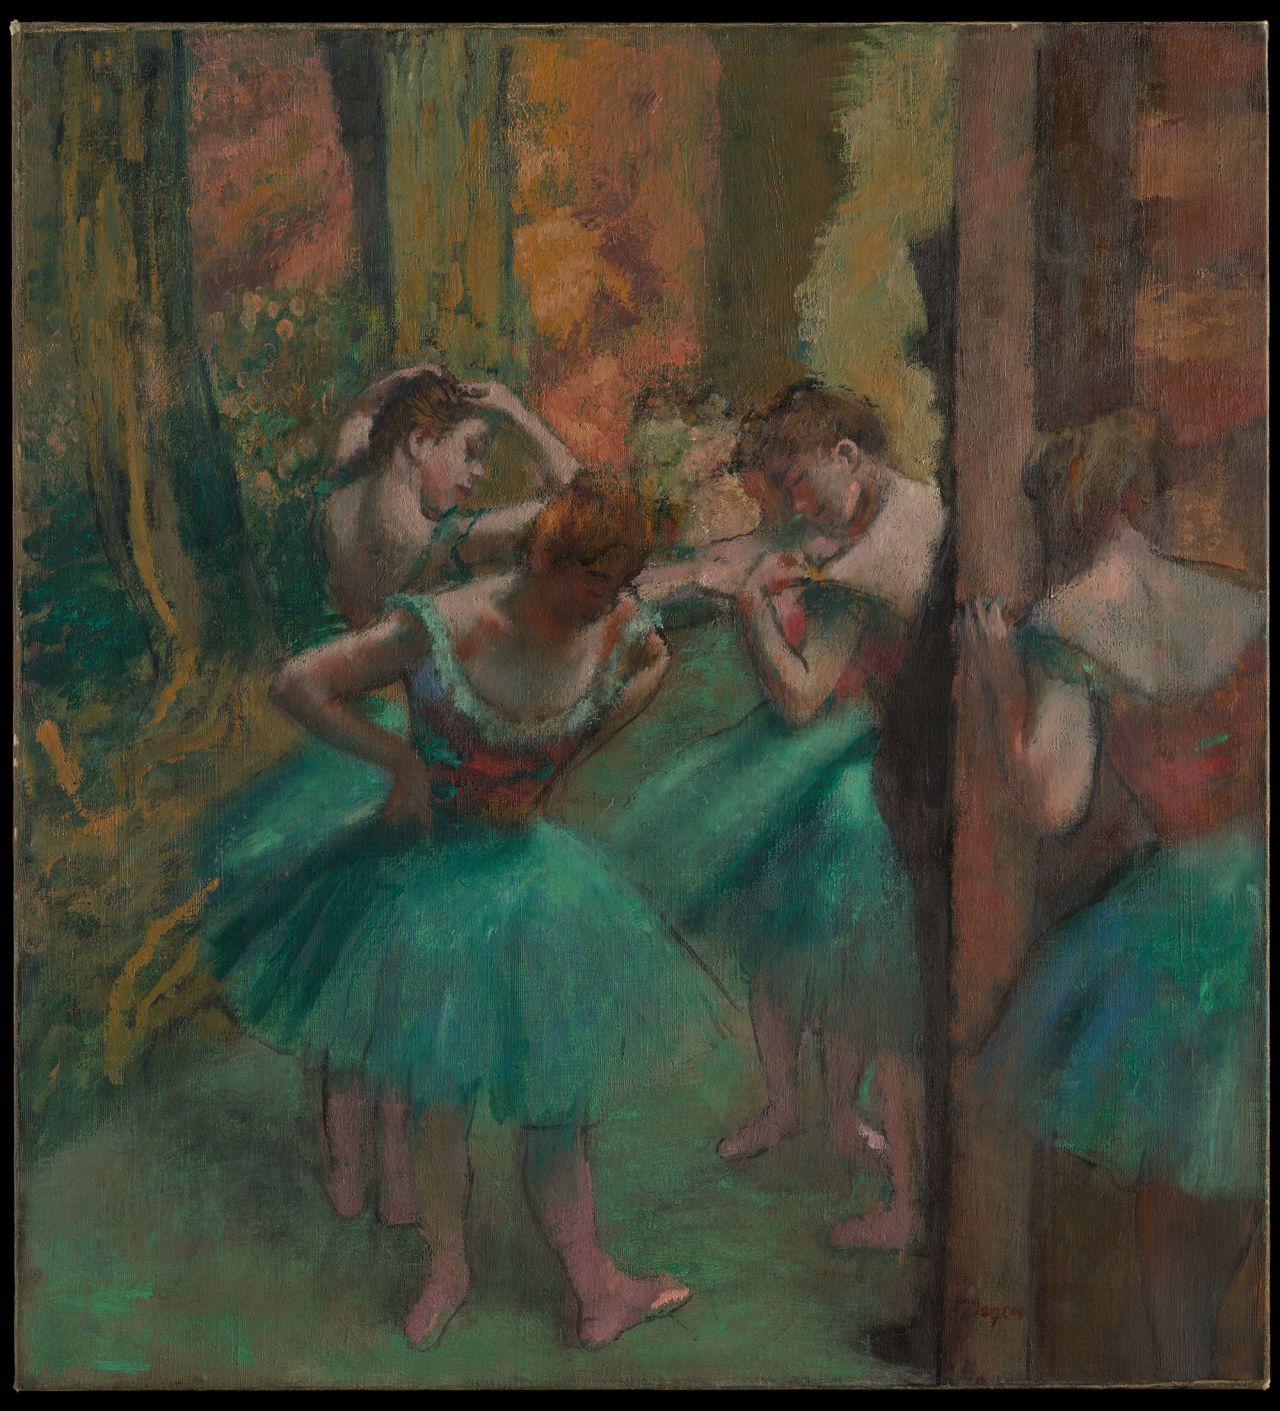 Degas favored scenes of ballet dancers, laundresses, milliners and other members from the lower echelons of Parisian society.